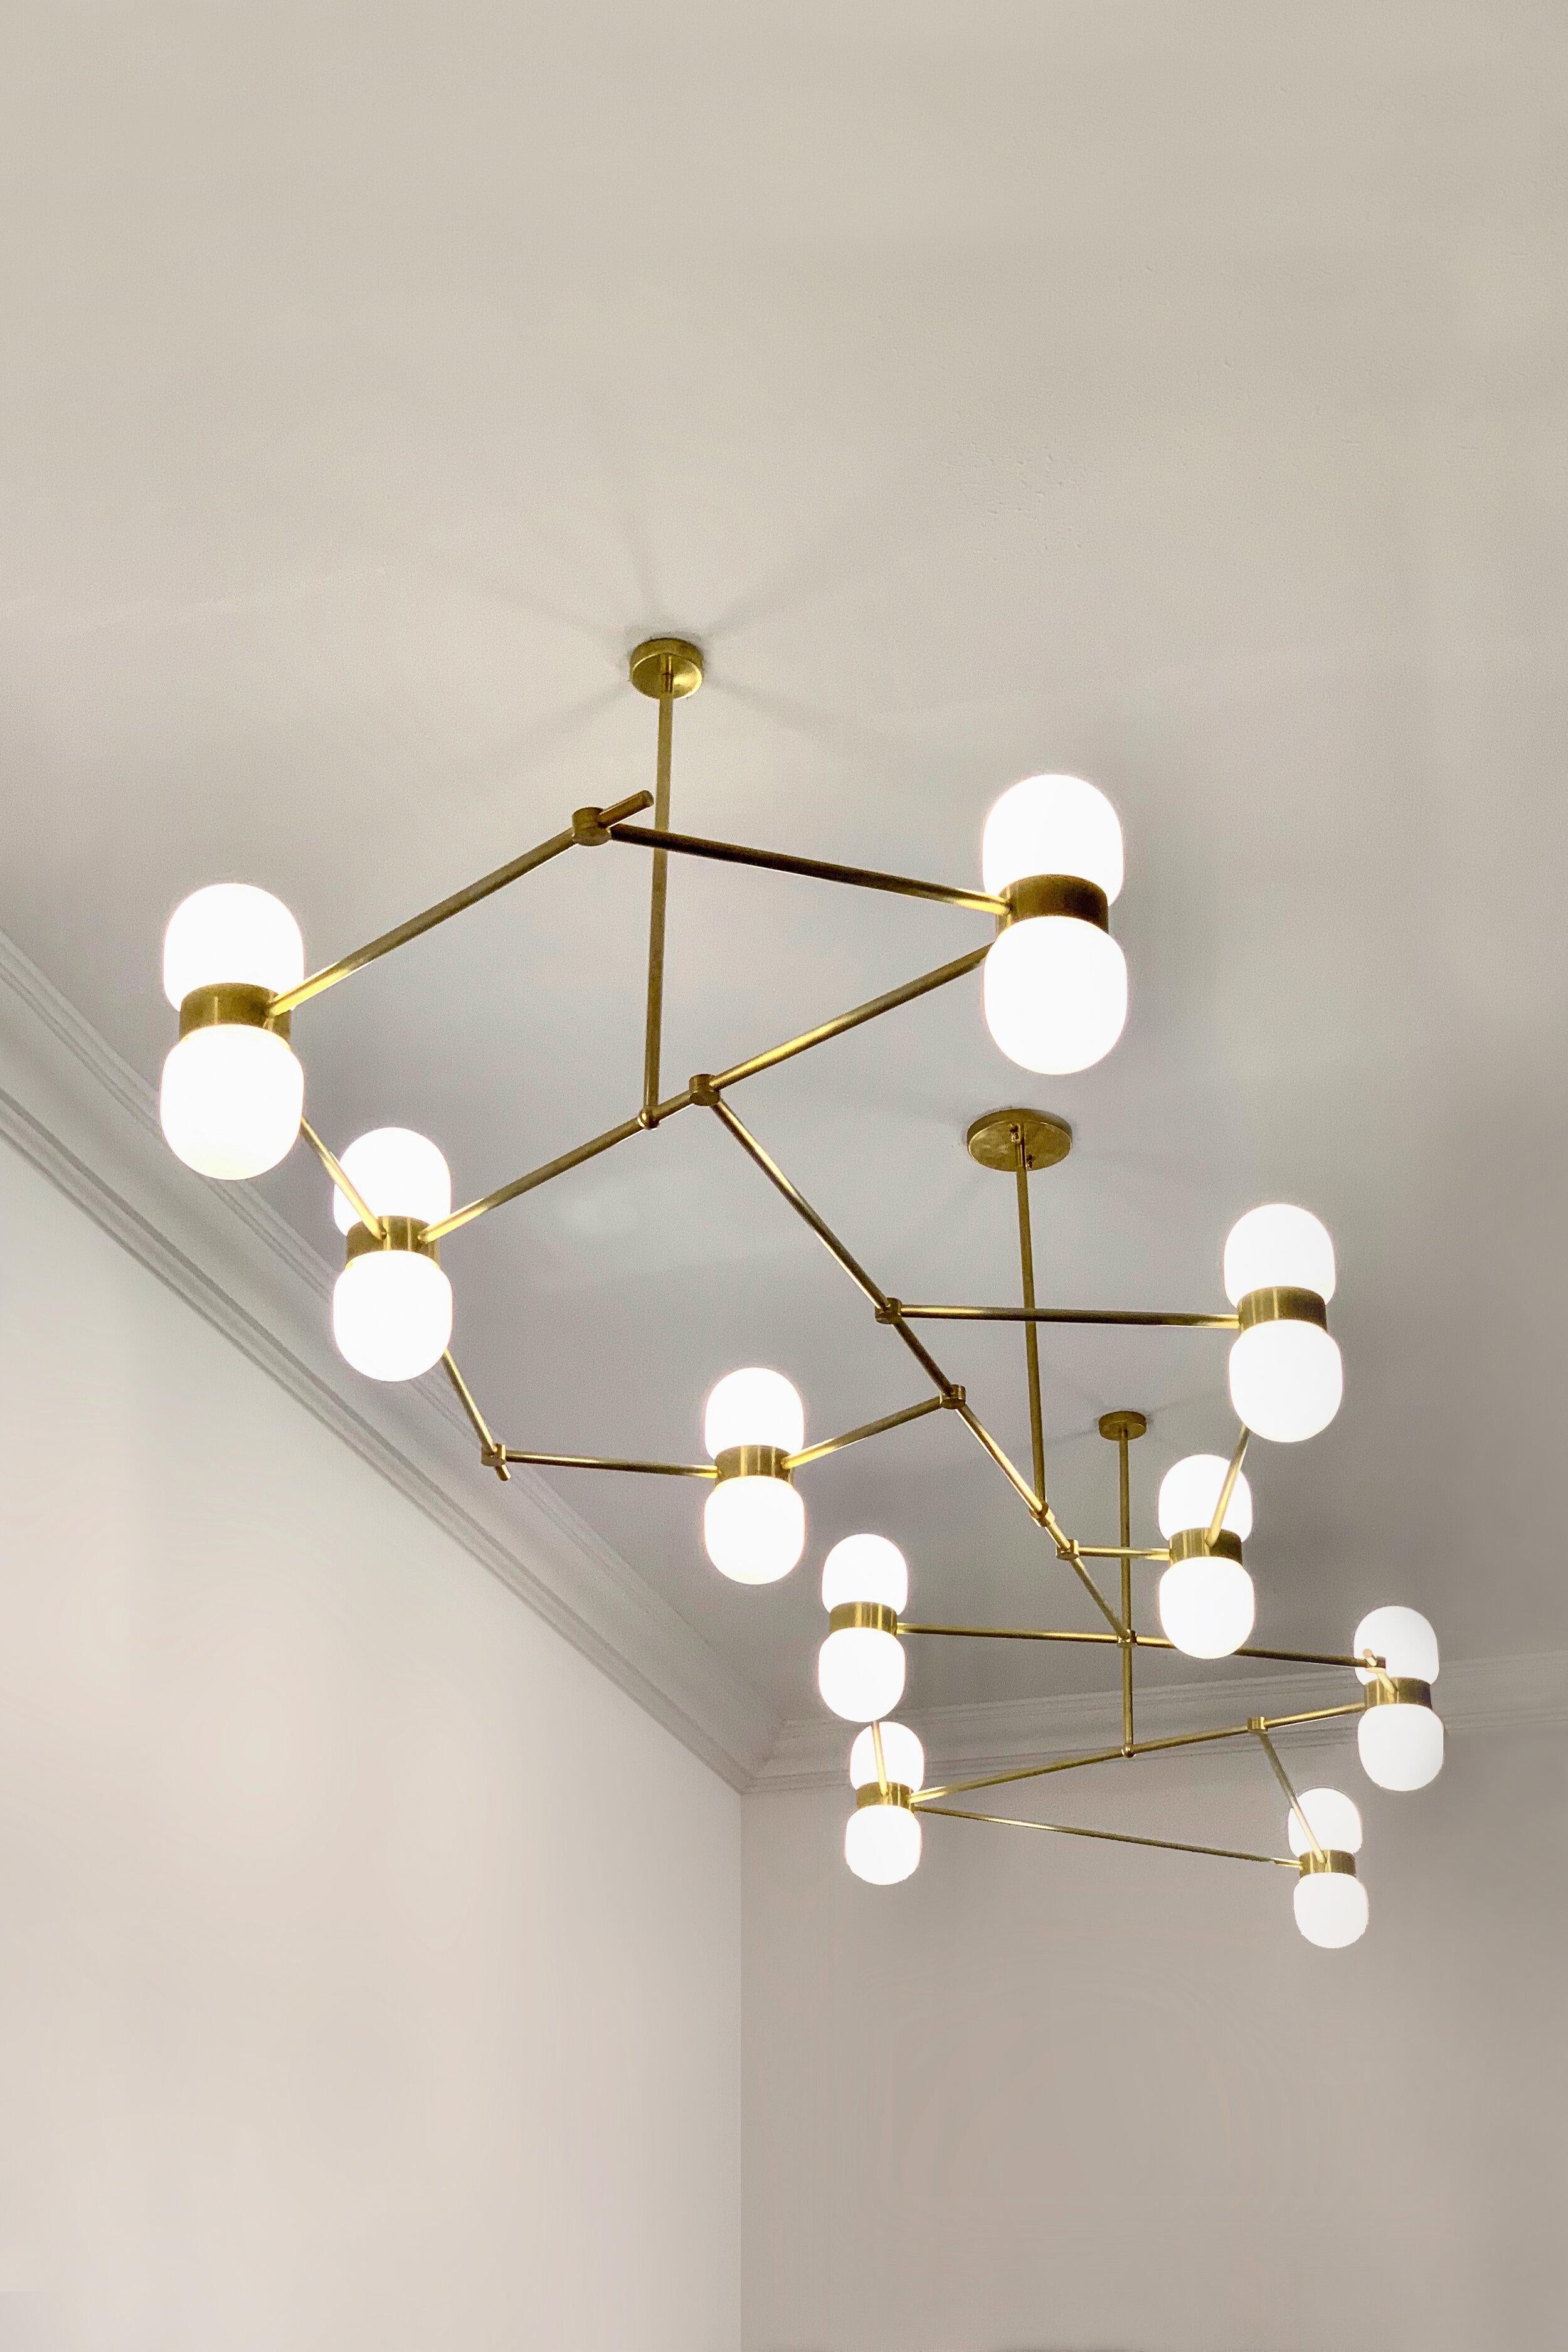 Nuvol chandelier 10 lamps by Contain
Dimensions: D 270 x W 20 x H 140 cm
Materials: brass structure and matte or glossy glass.
Available in different finishes and dimensions. 

All our lamps can be wired according to each country. If sold to